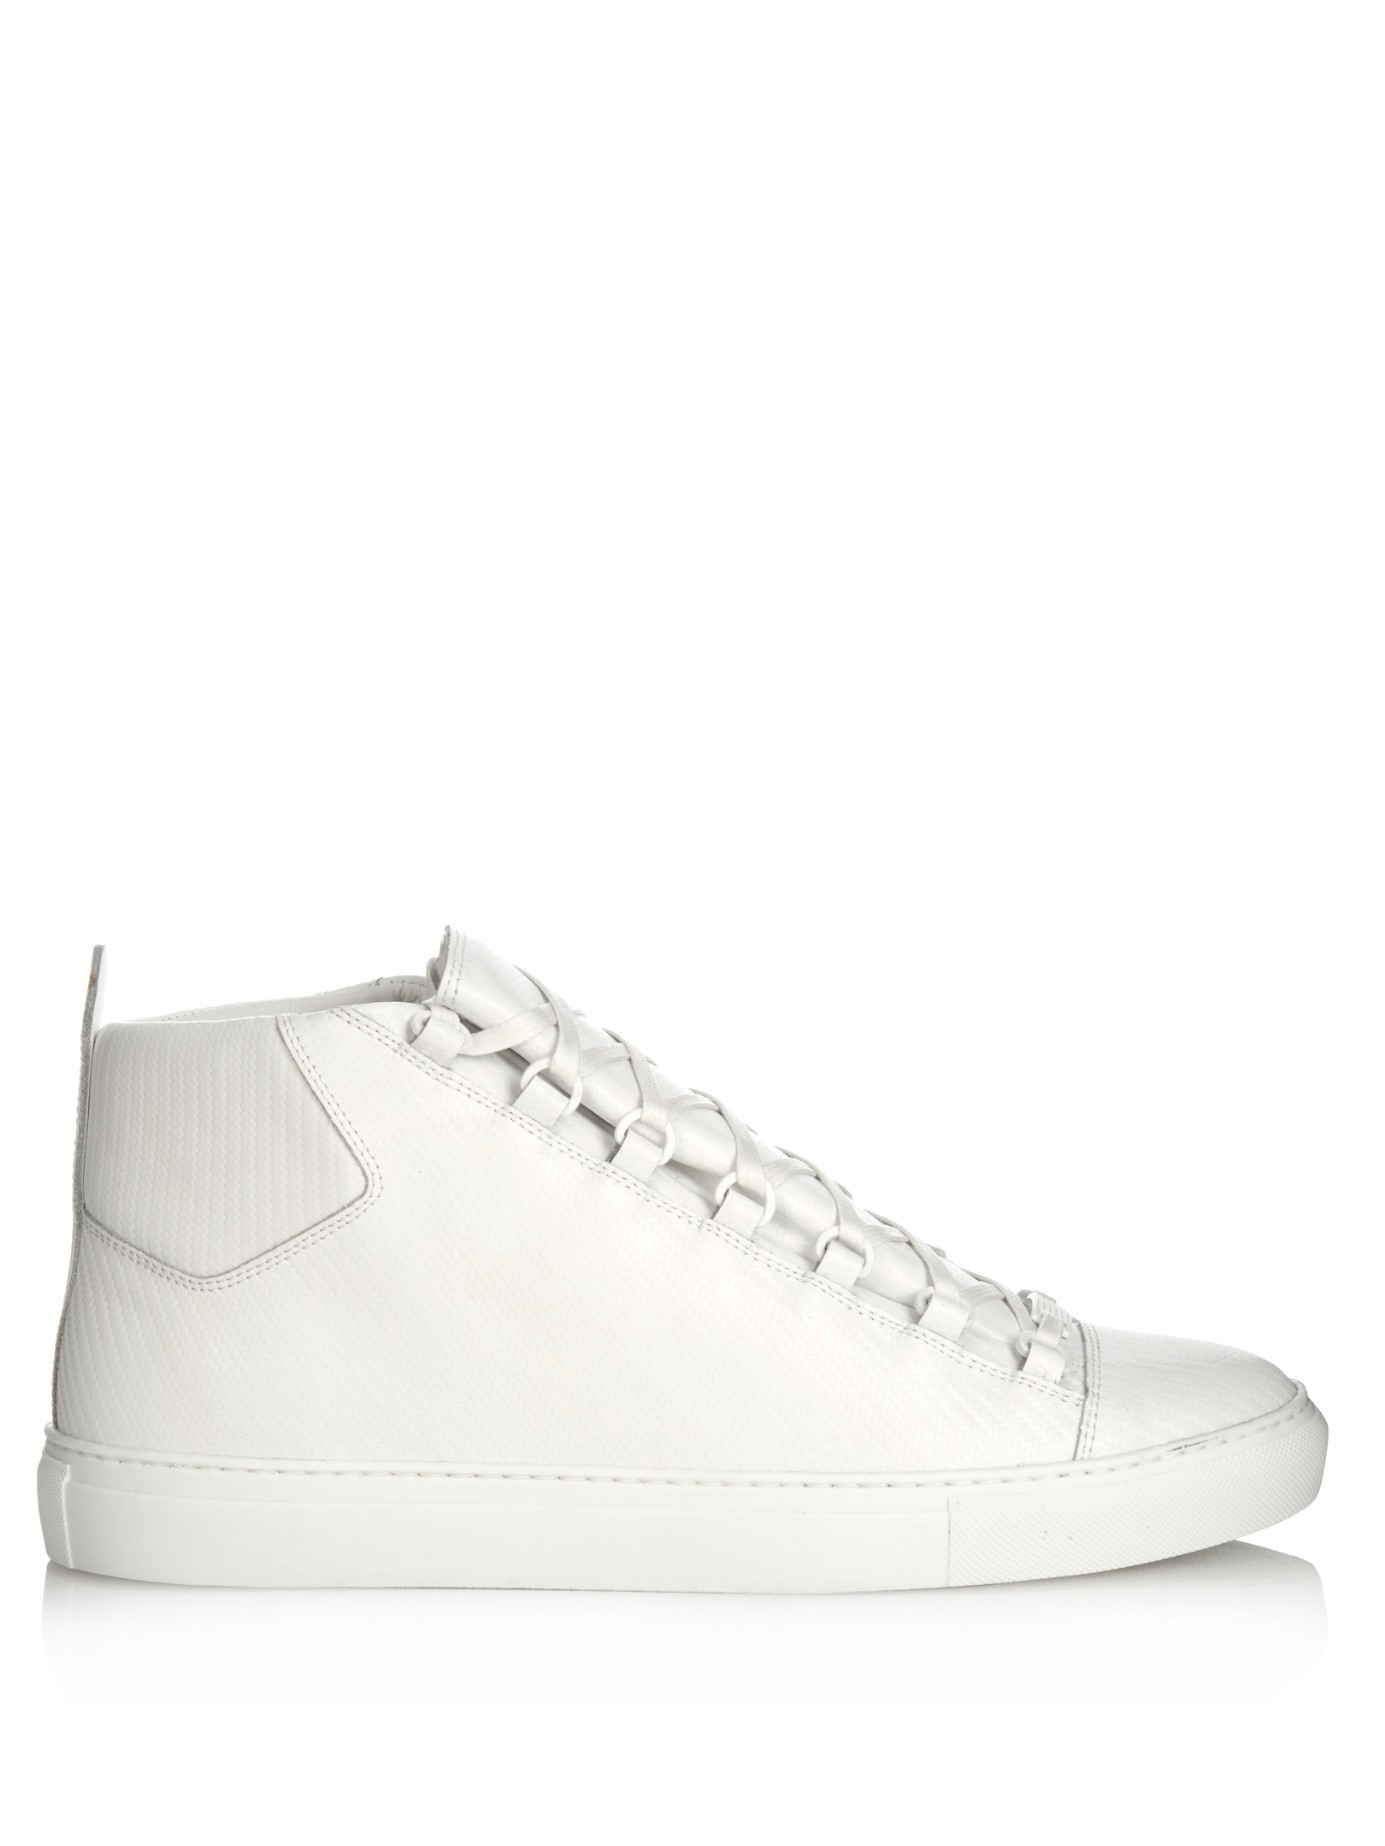 Balenciaga Arena High-top Leather Sneaker in White for Men - Lyst